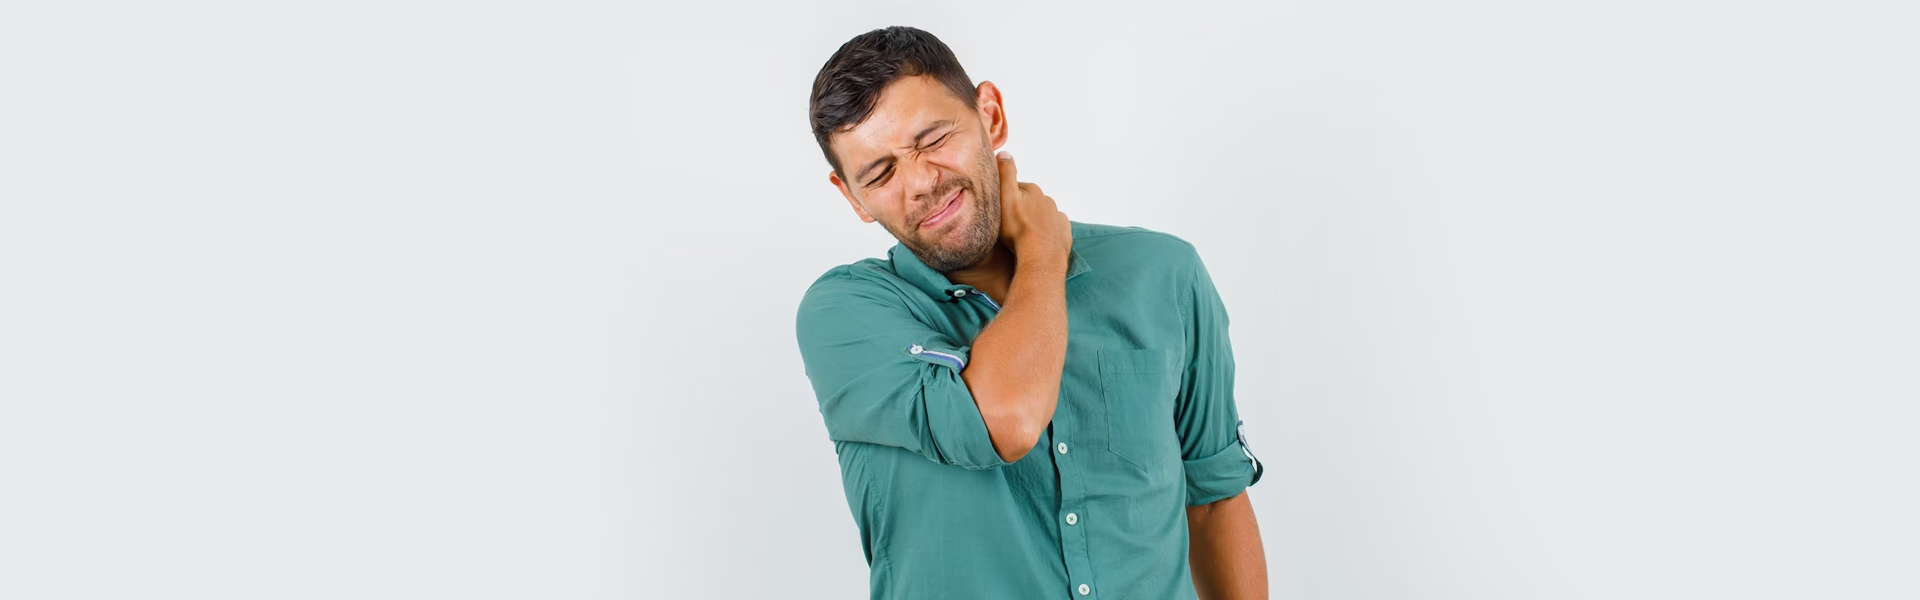 Neck Pain: Why Should I Go to the Chiropractor for pain relief?